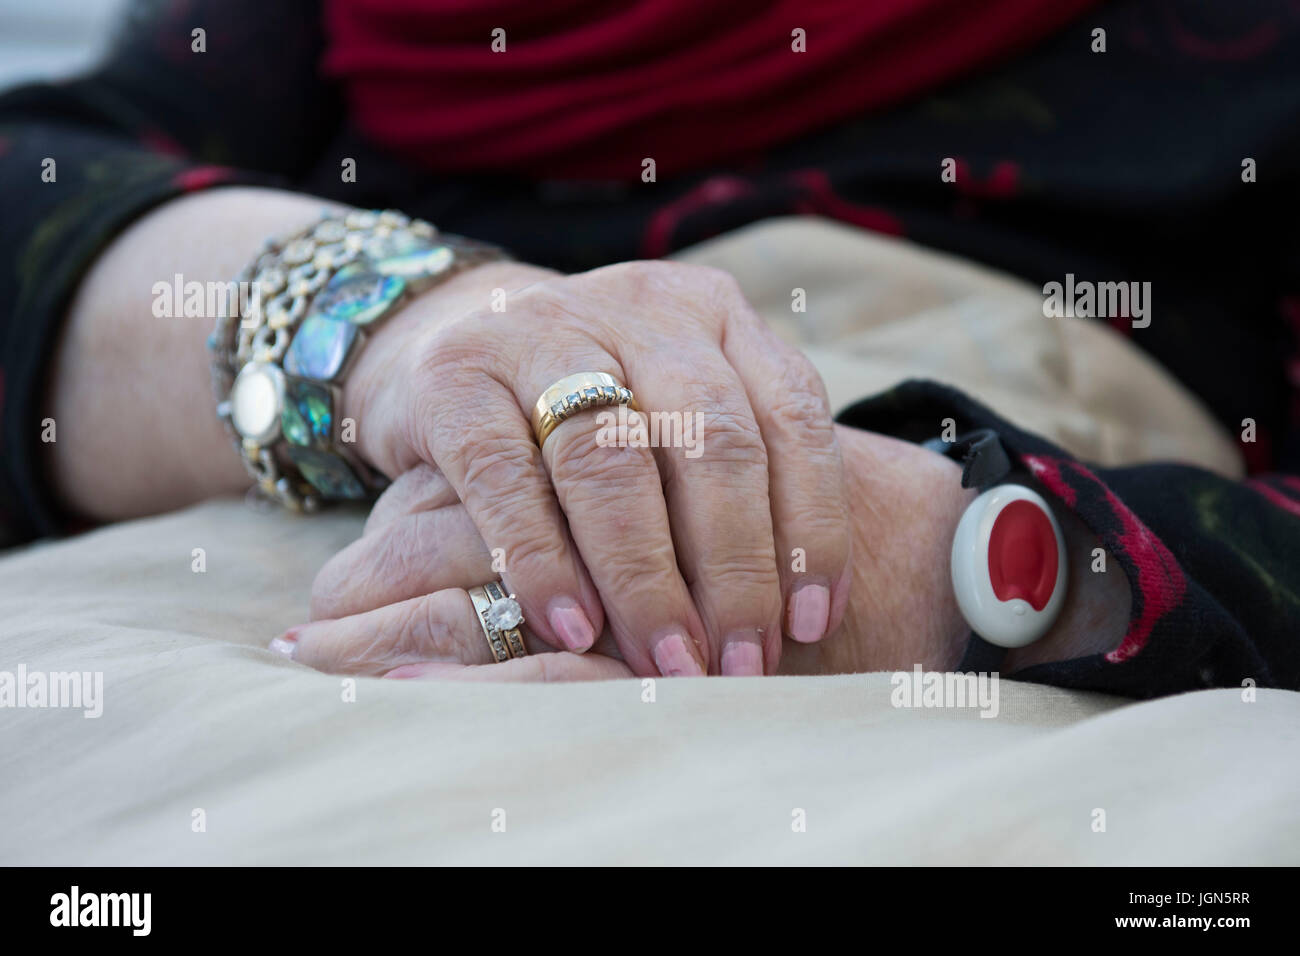 A vulnerable old age pensioner wears a panic alarm wristband. Stock Photo